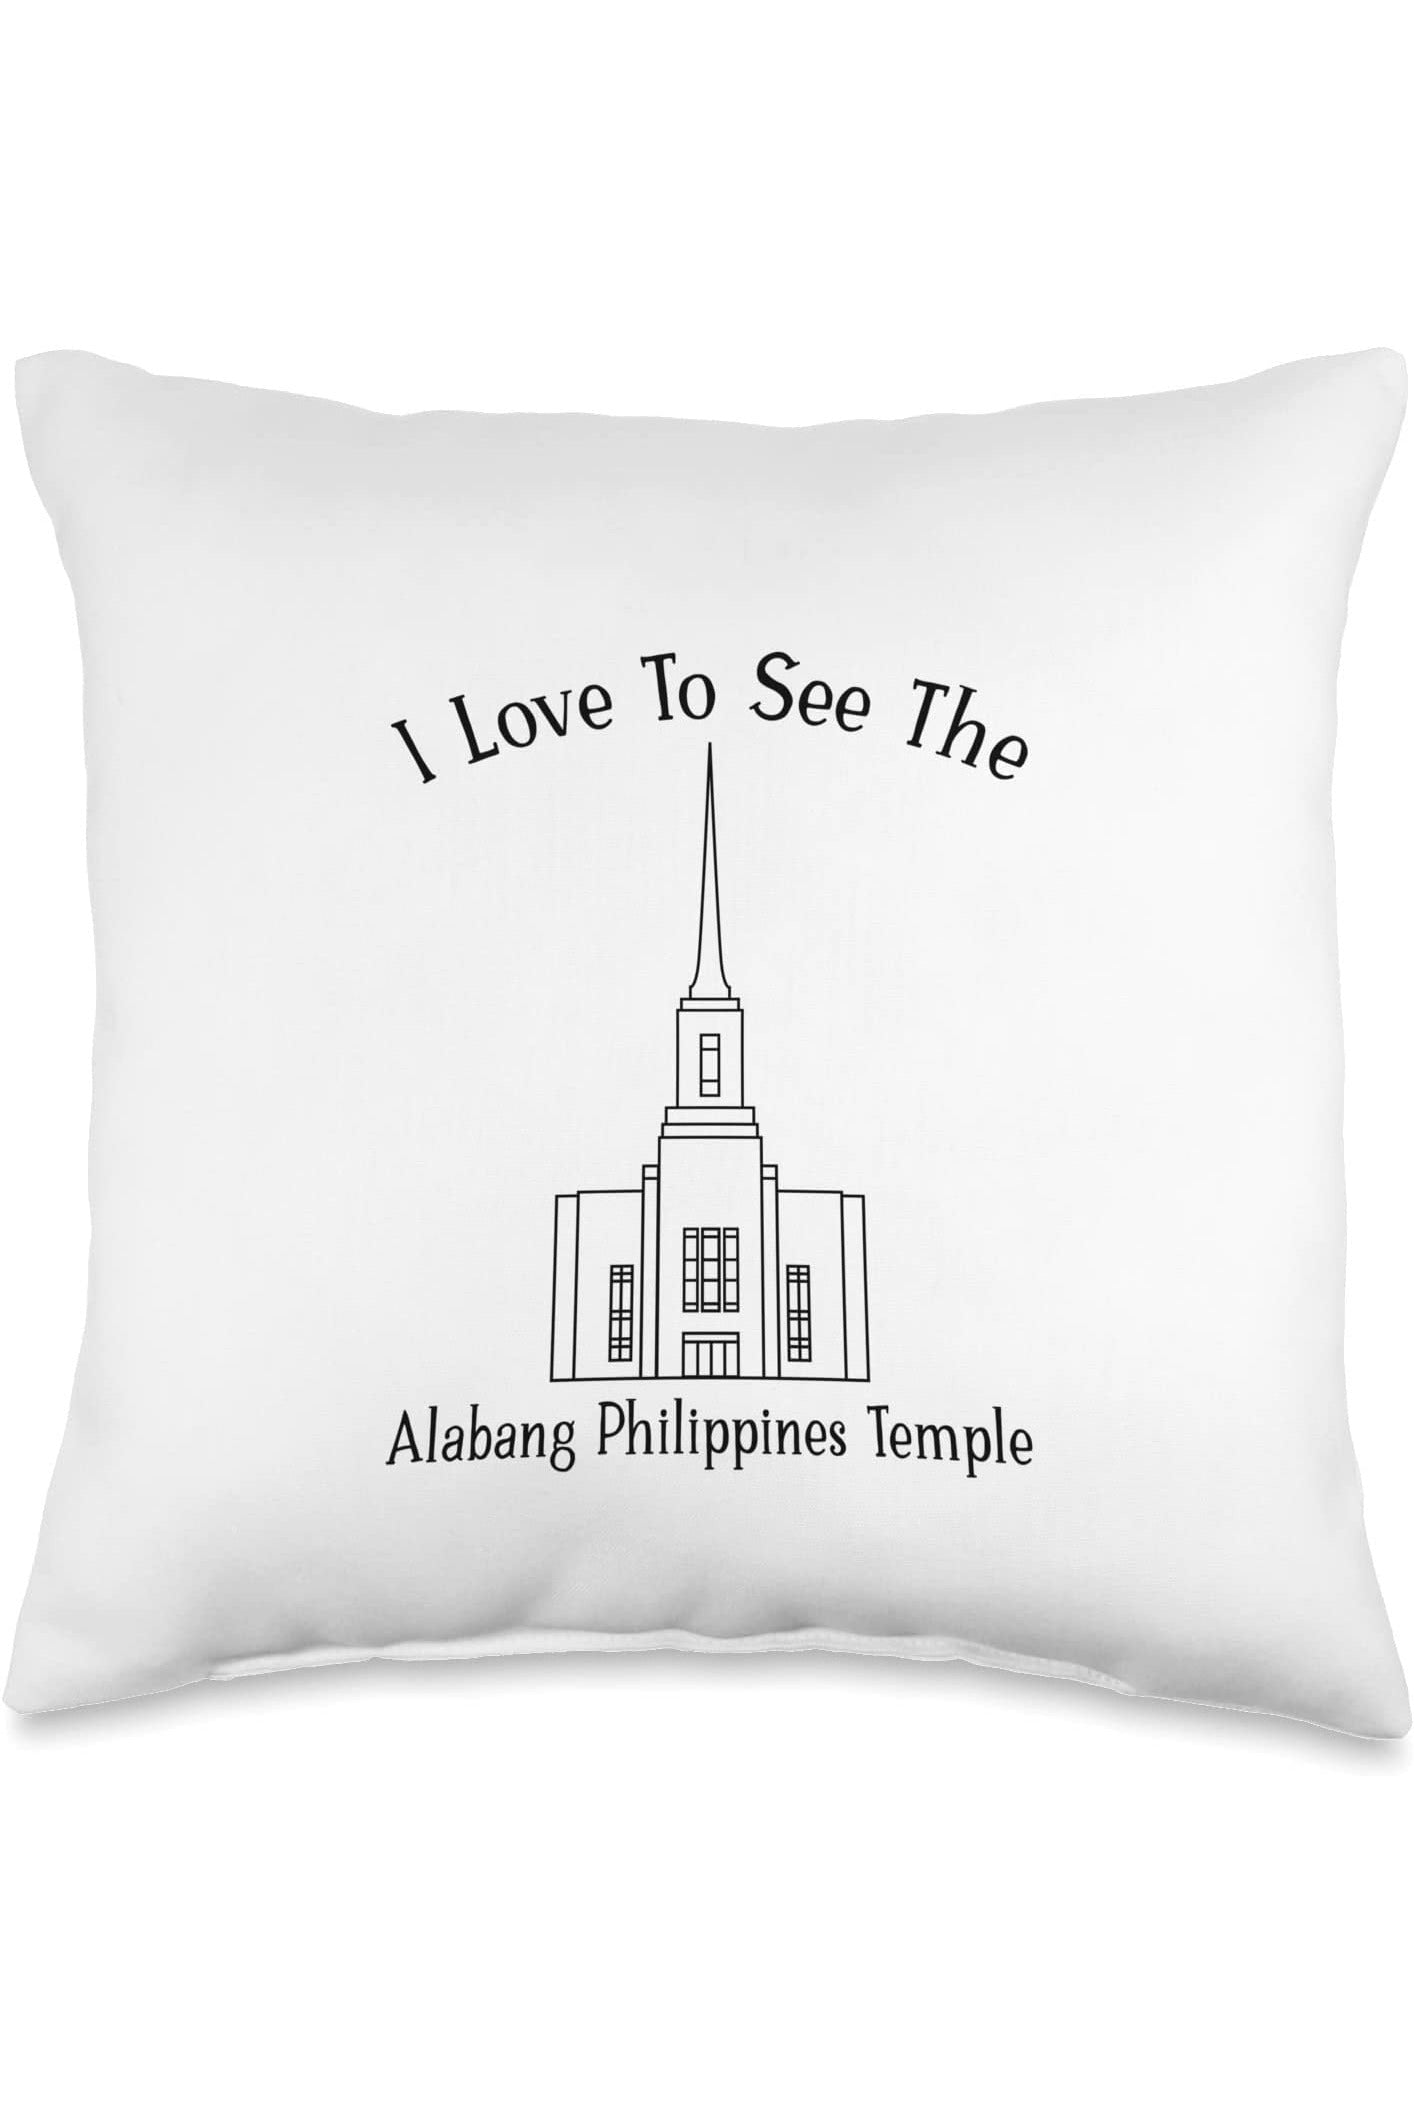 Alabang Philippines Temple Throw Pillows - Happy Style (English) US